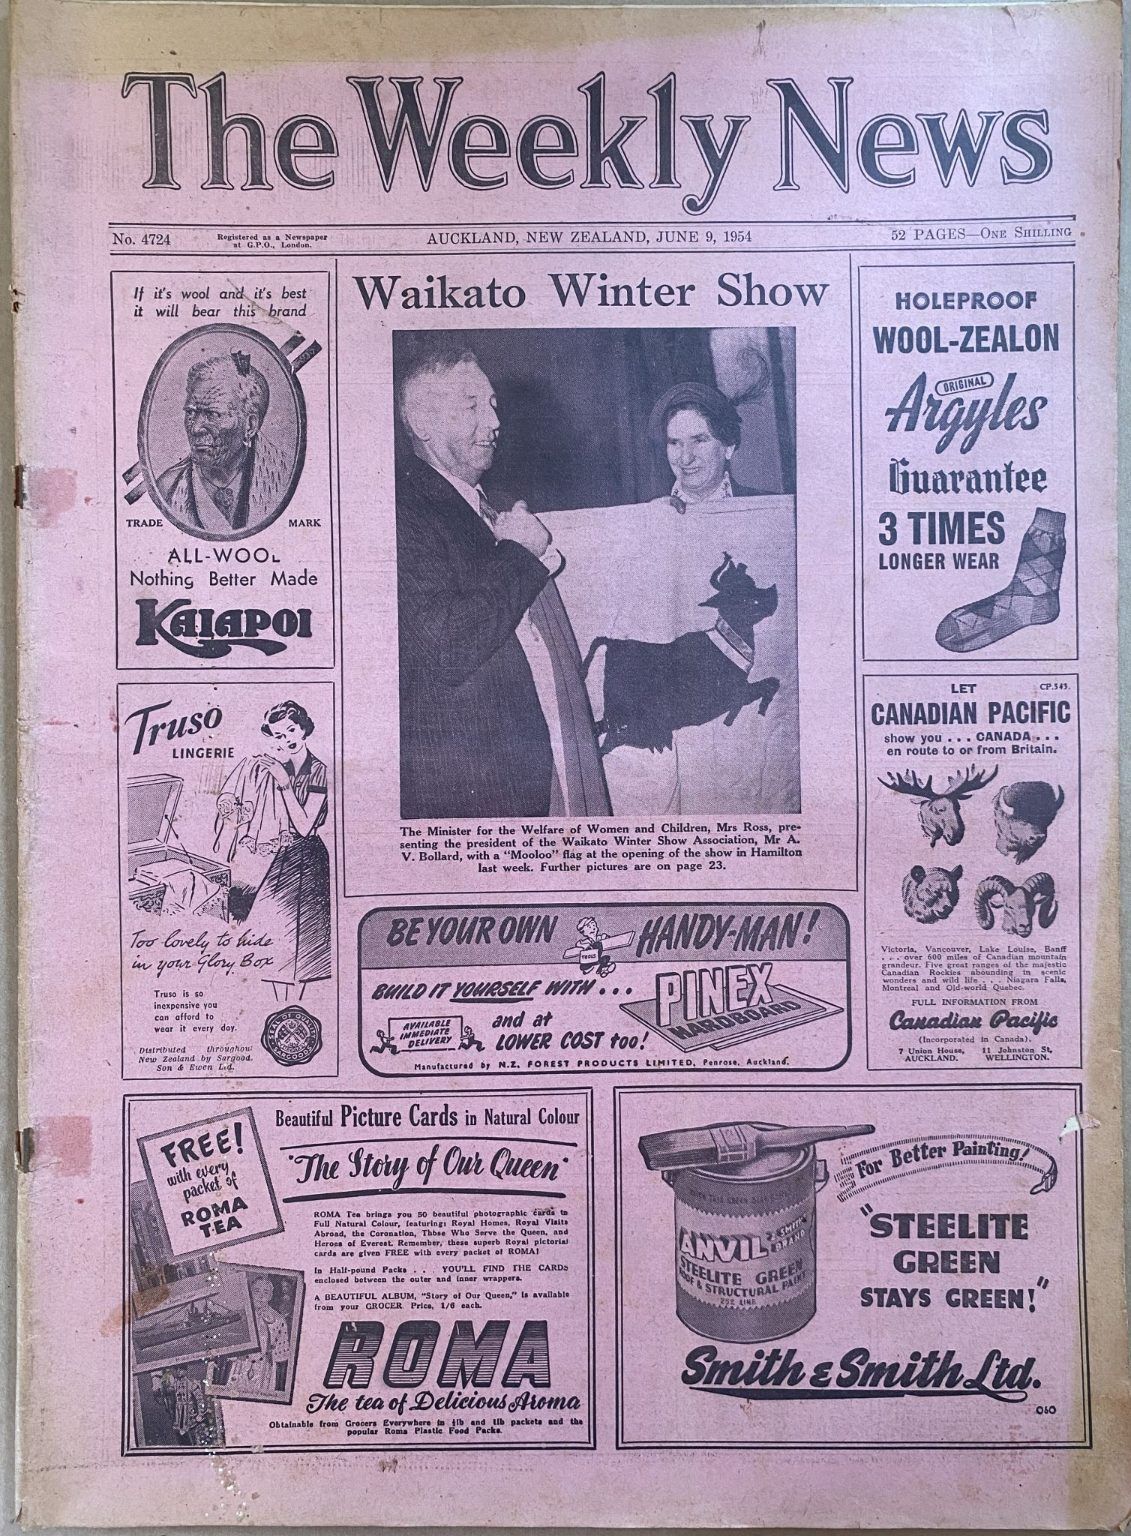 OLD NEWSPAPER: The Weekly News - No. 4724, 9 June 1954